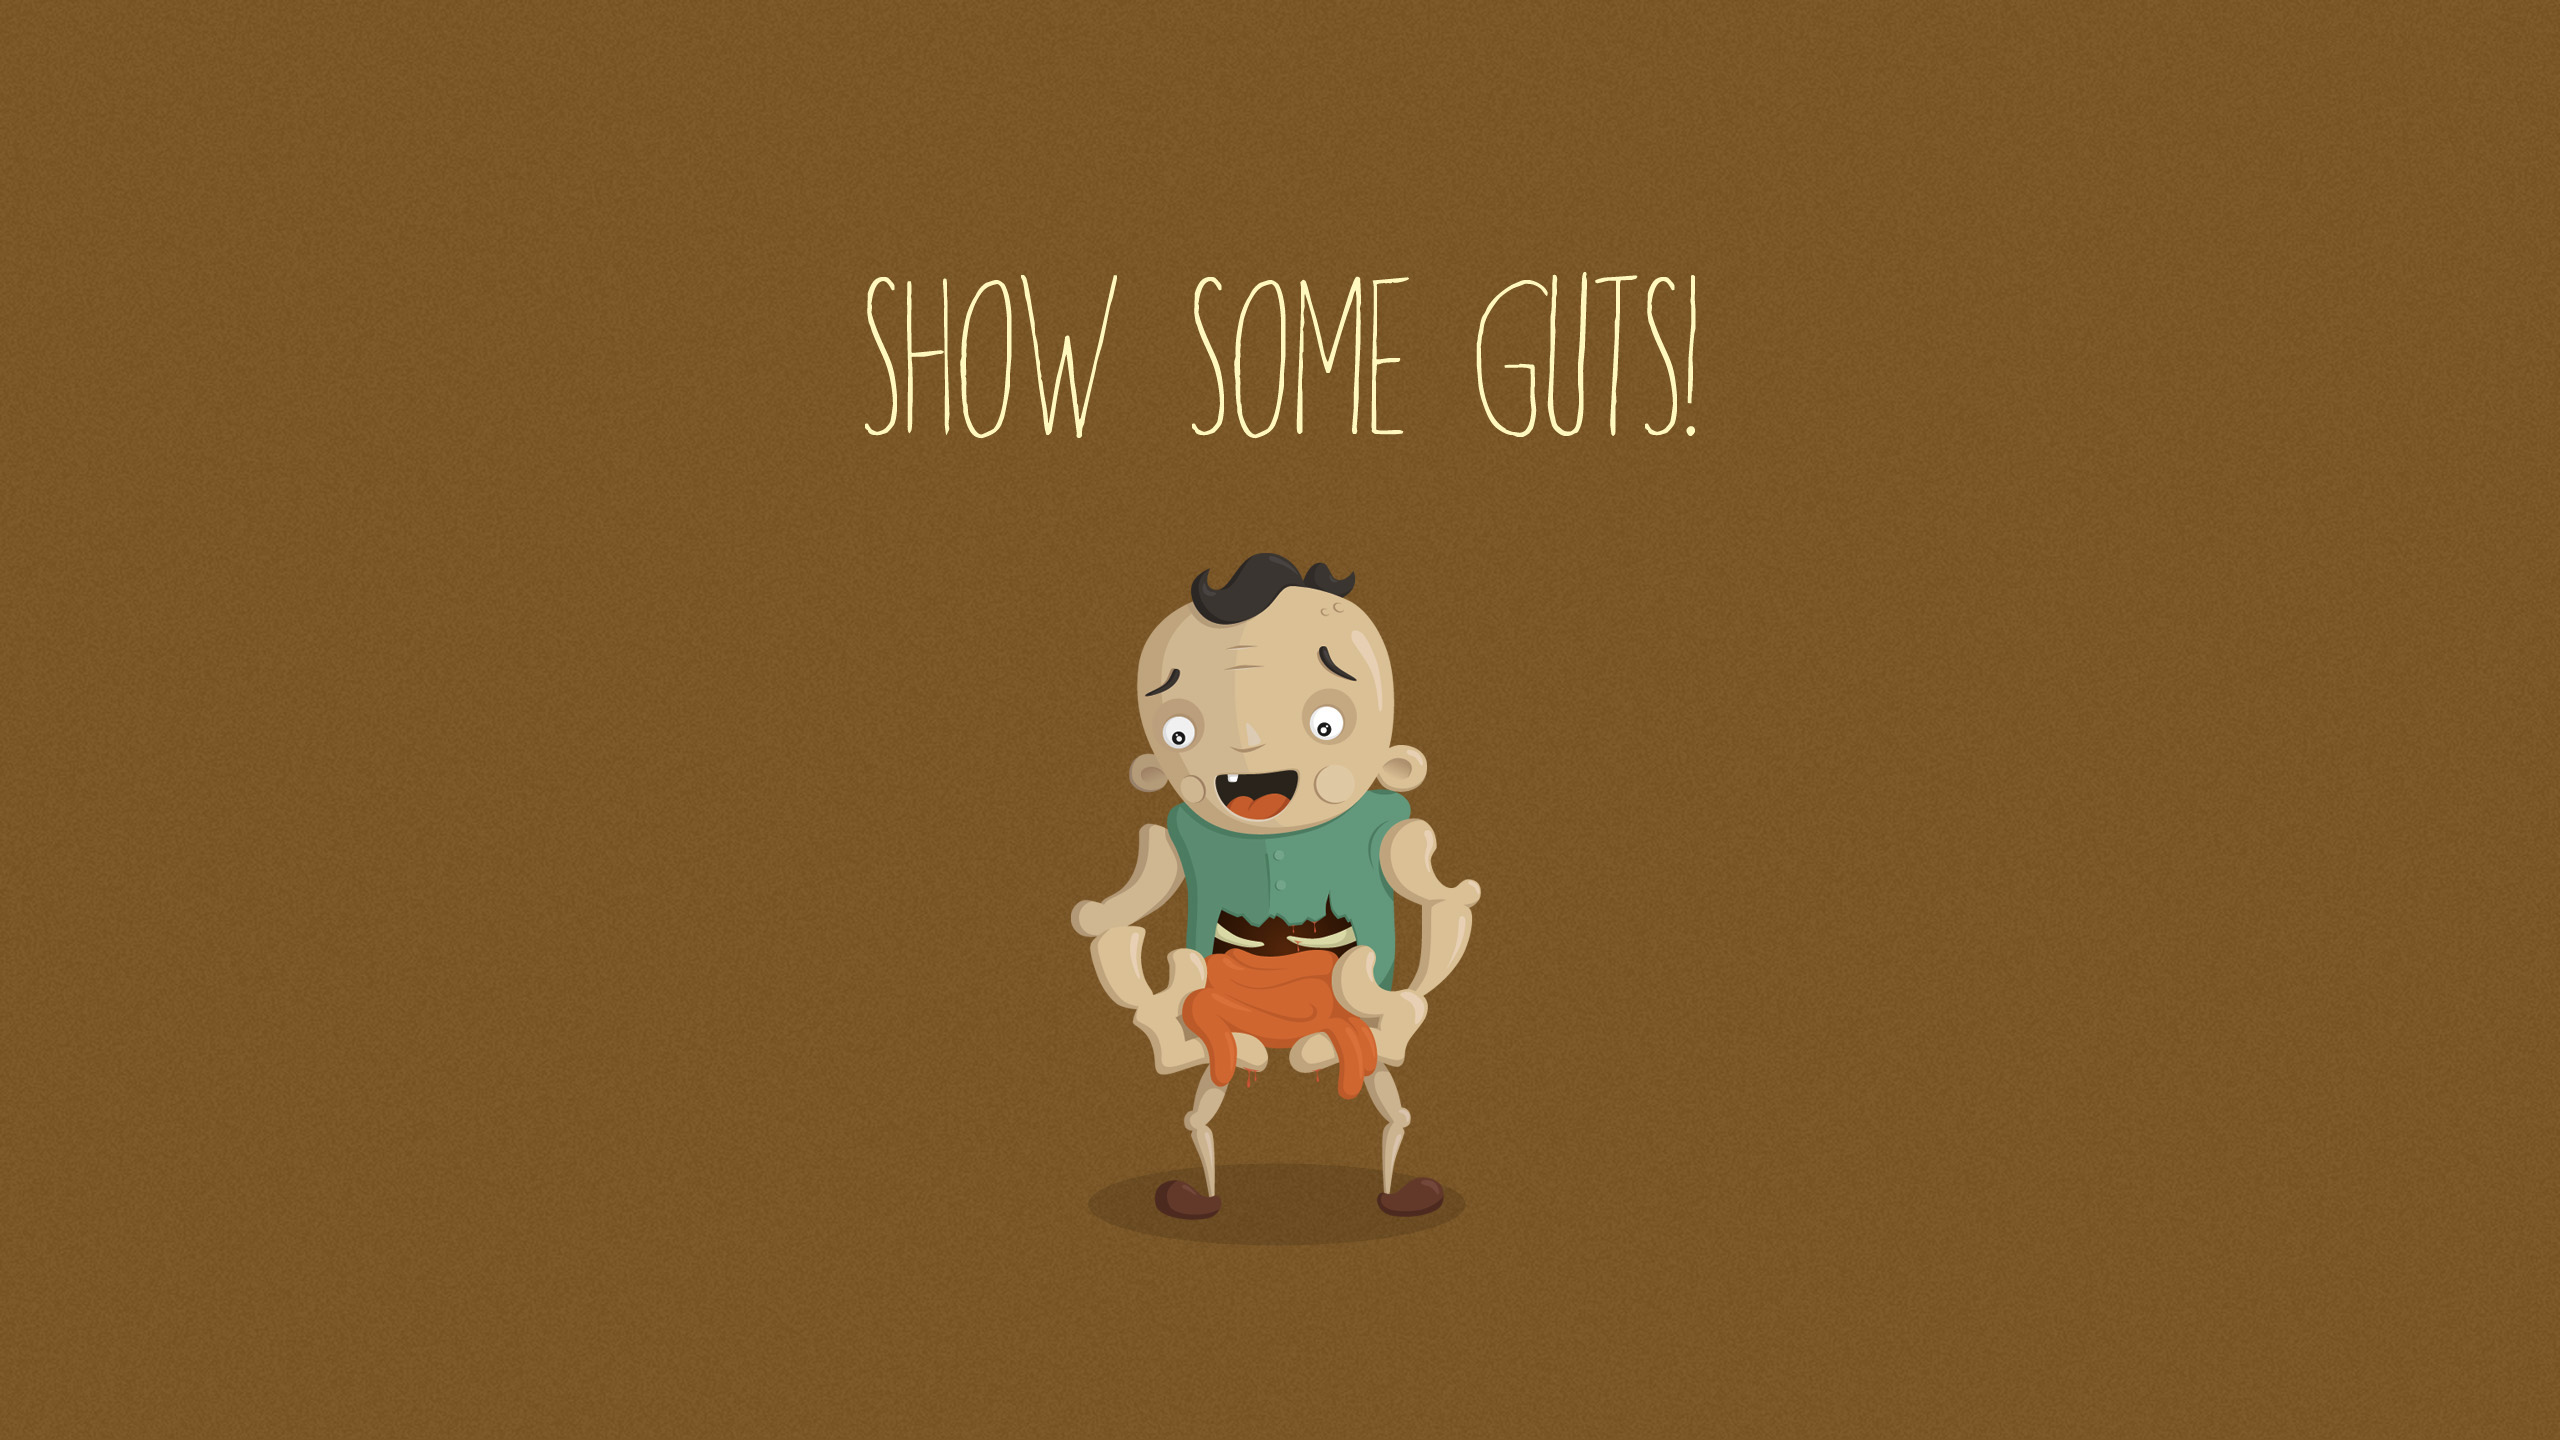 Humor Show Some Guts HD Wallpaper | Background Image